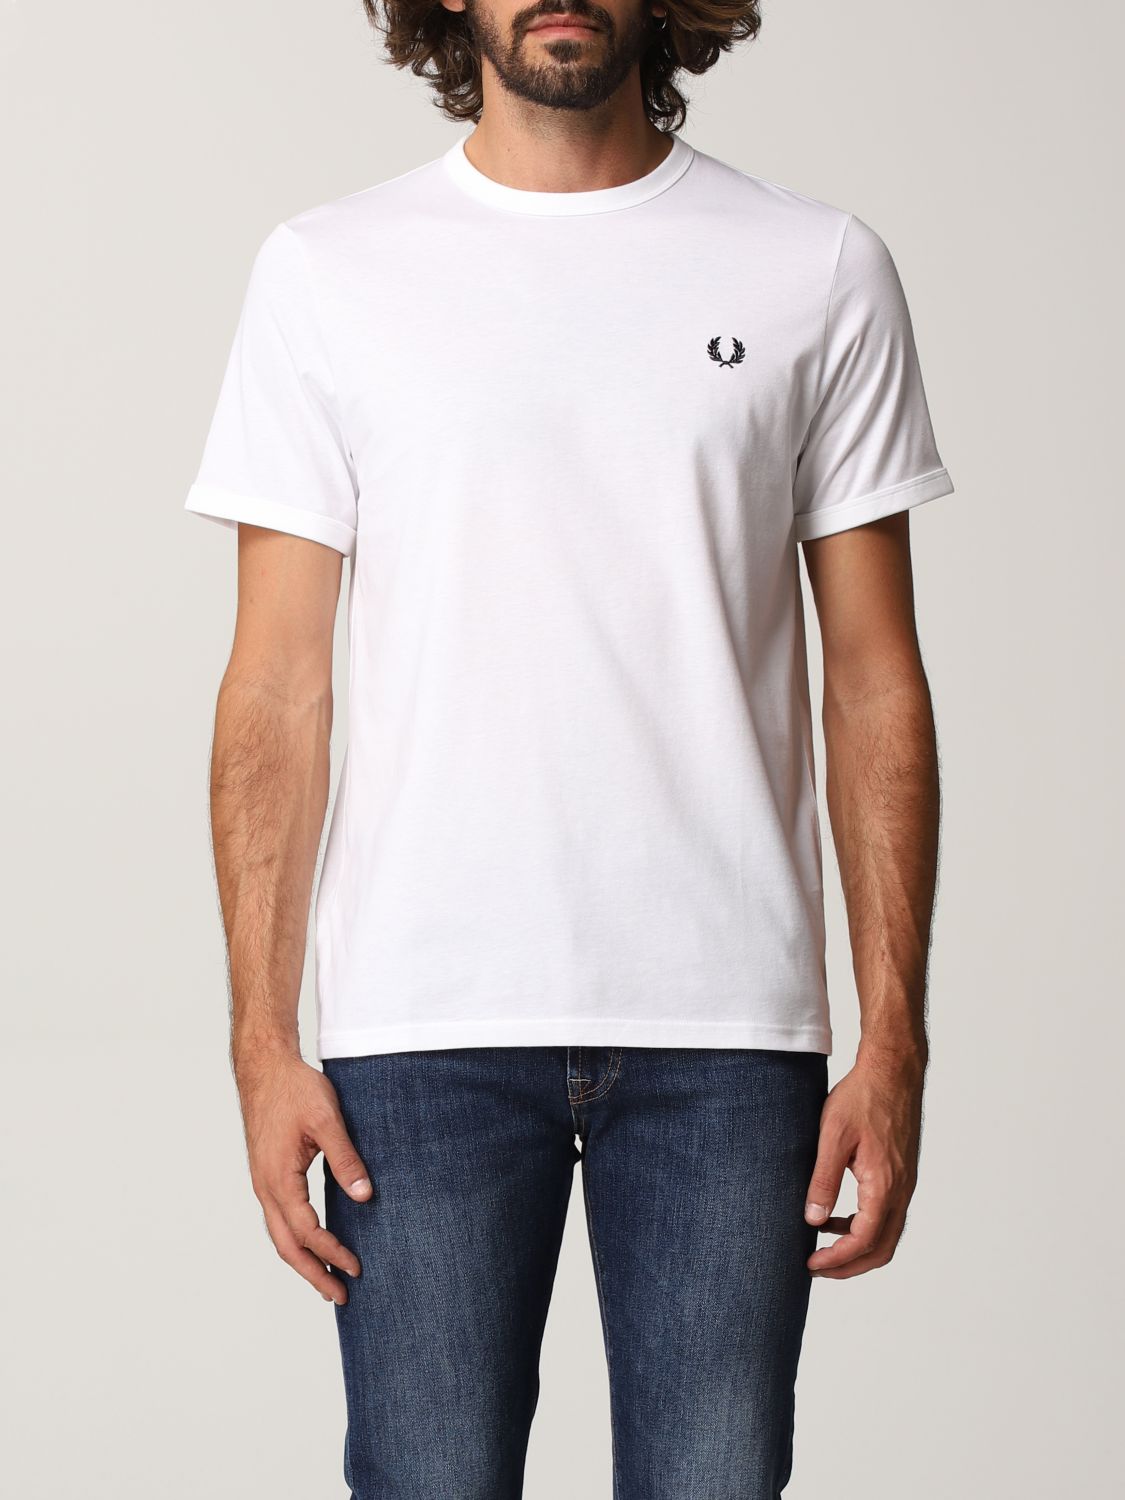 Tシャツ Fred Perry: Tシャツ メンズ Fred Perry ホワイト 1